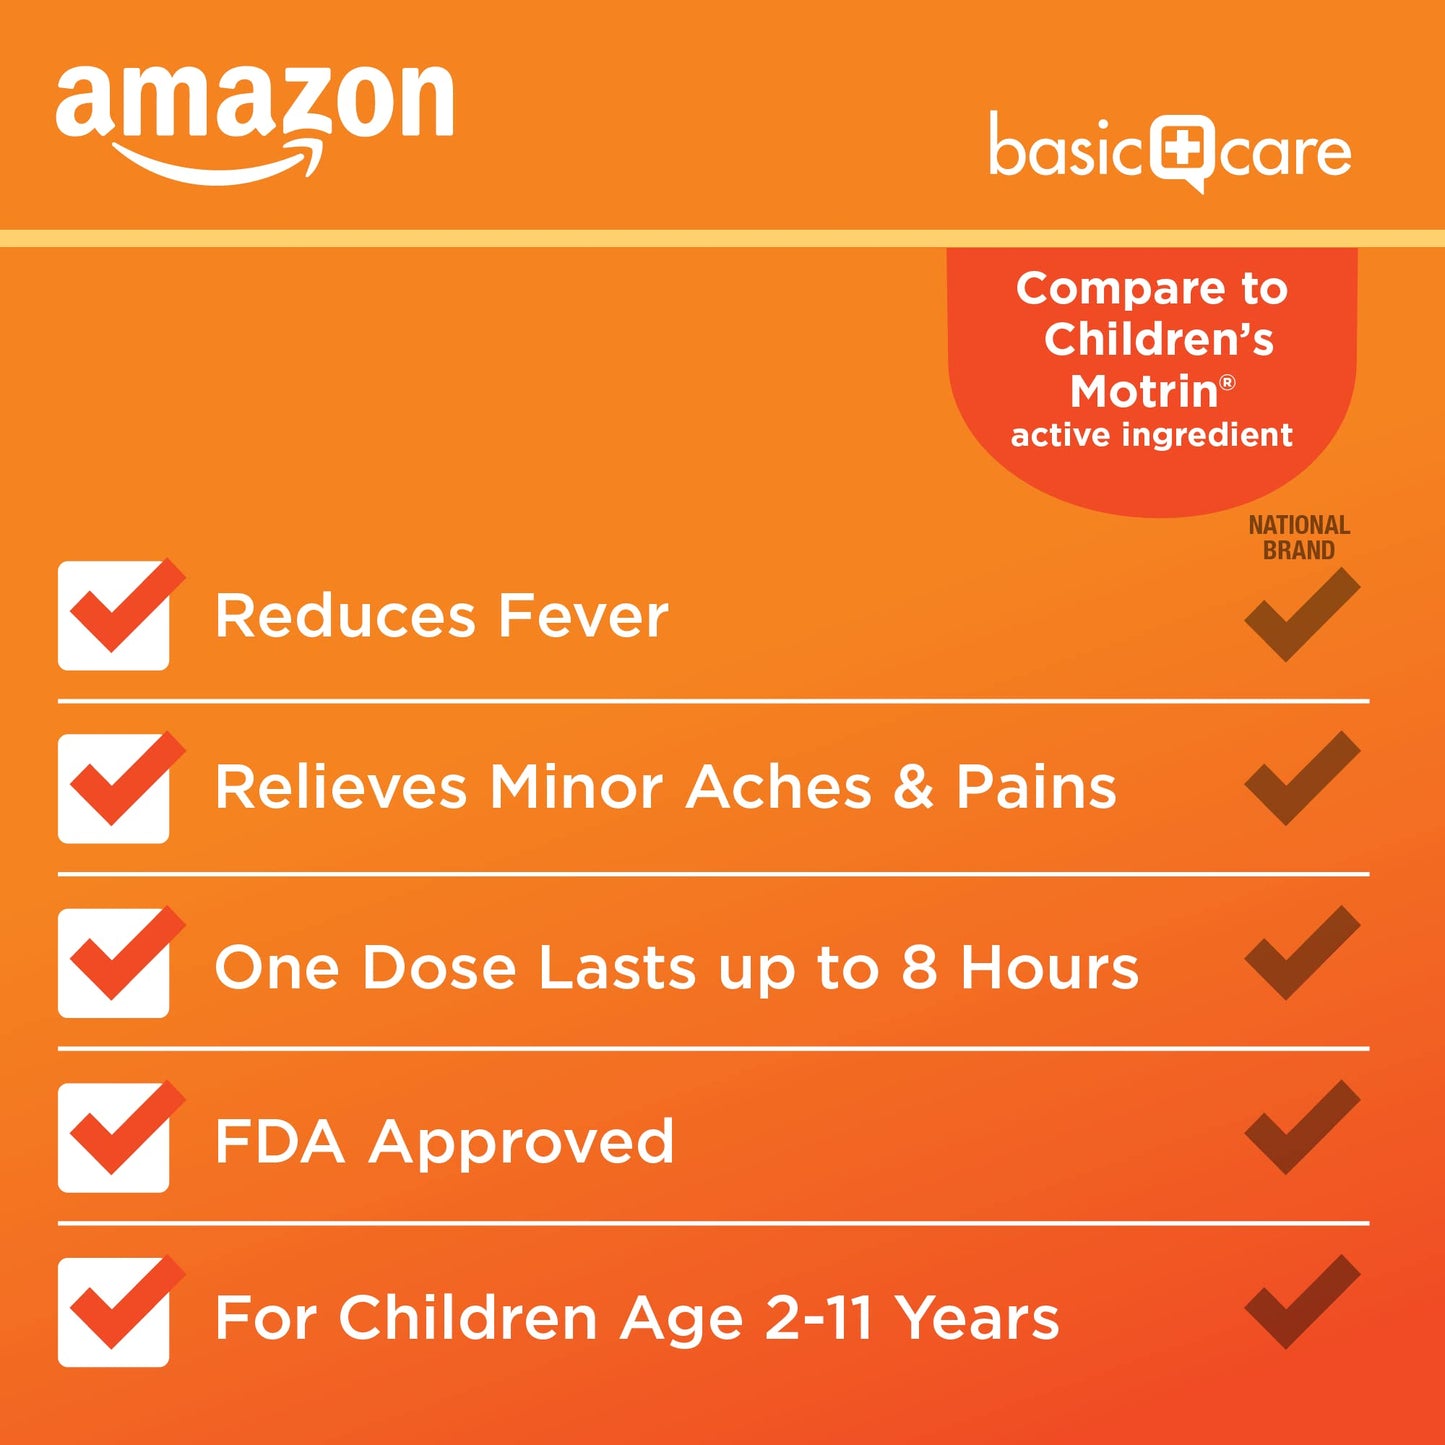 Amazon Basic Care Children's Ibuprofen Chewable Tablets 100 mg, Grape Flavor, Pain Reliever and Fever Reducer (NSAID), For Sore Throat, Toothache, Headache Relief and More, 24 Count